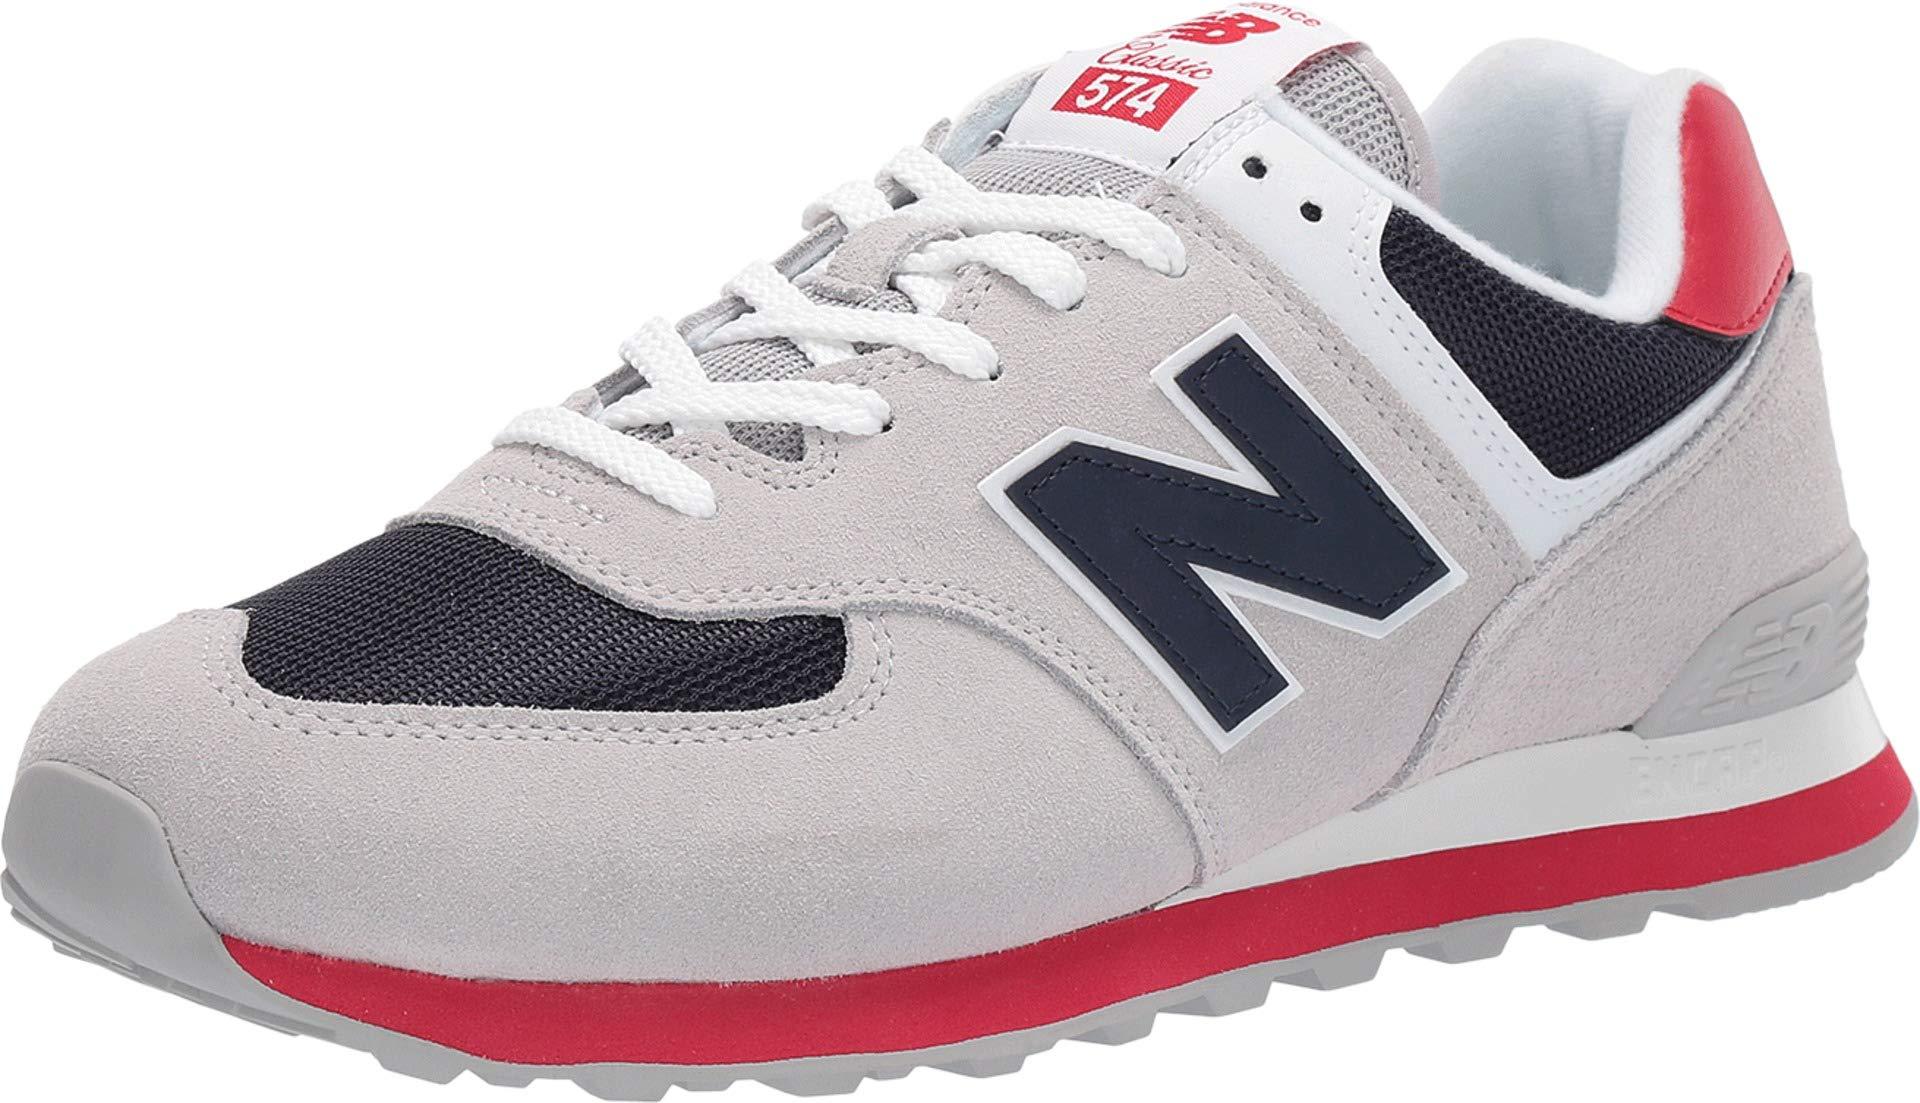 New Balance Suede Ml574v2 in Gray for Men - Lyst